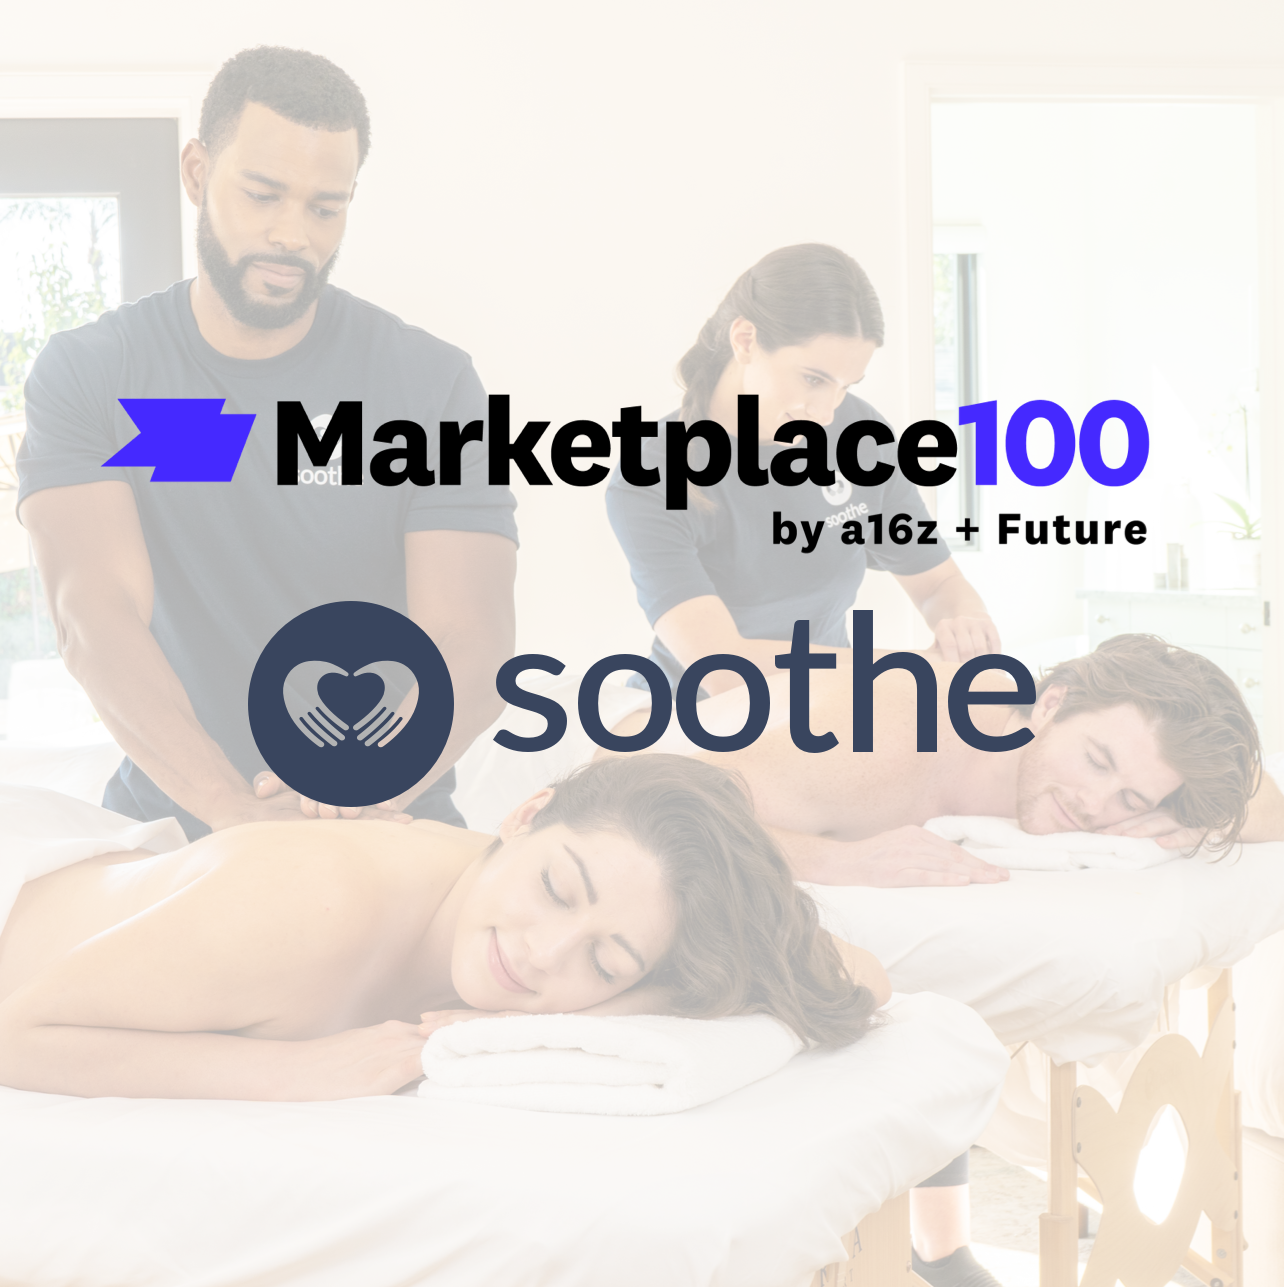 You are currently viewing Soothe Designated as a Top Marketplace Company